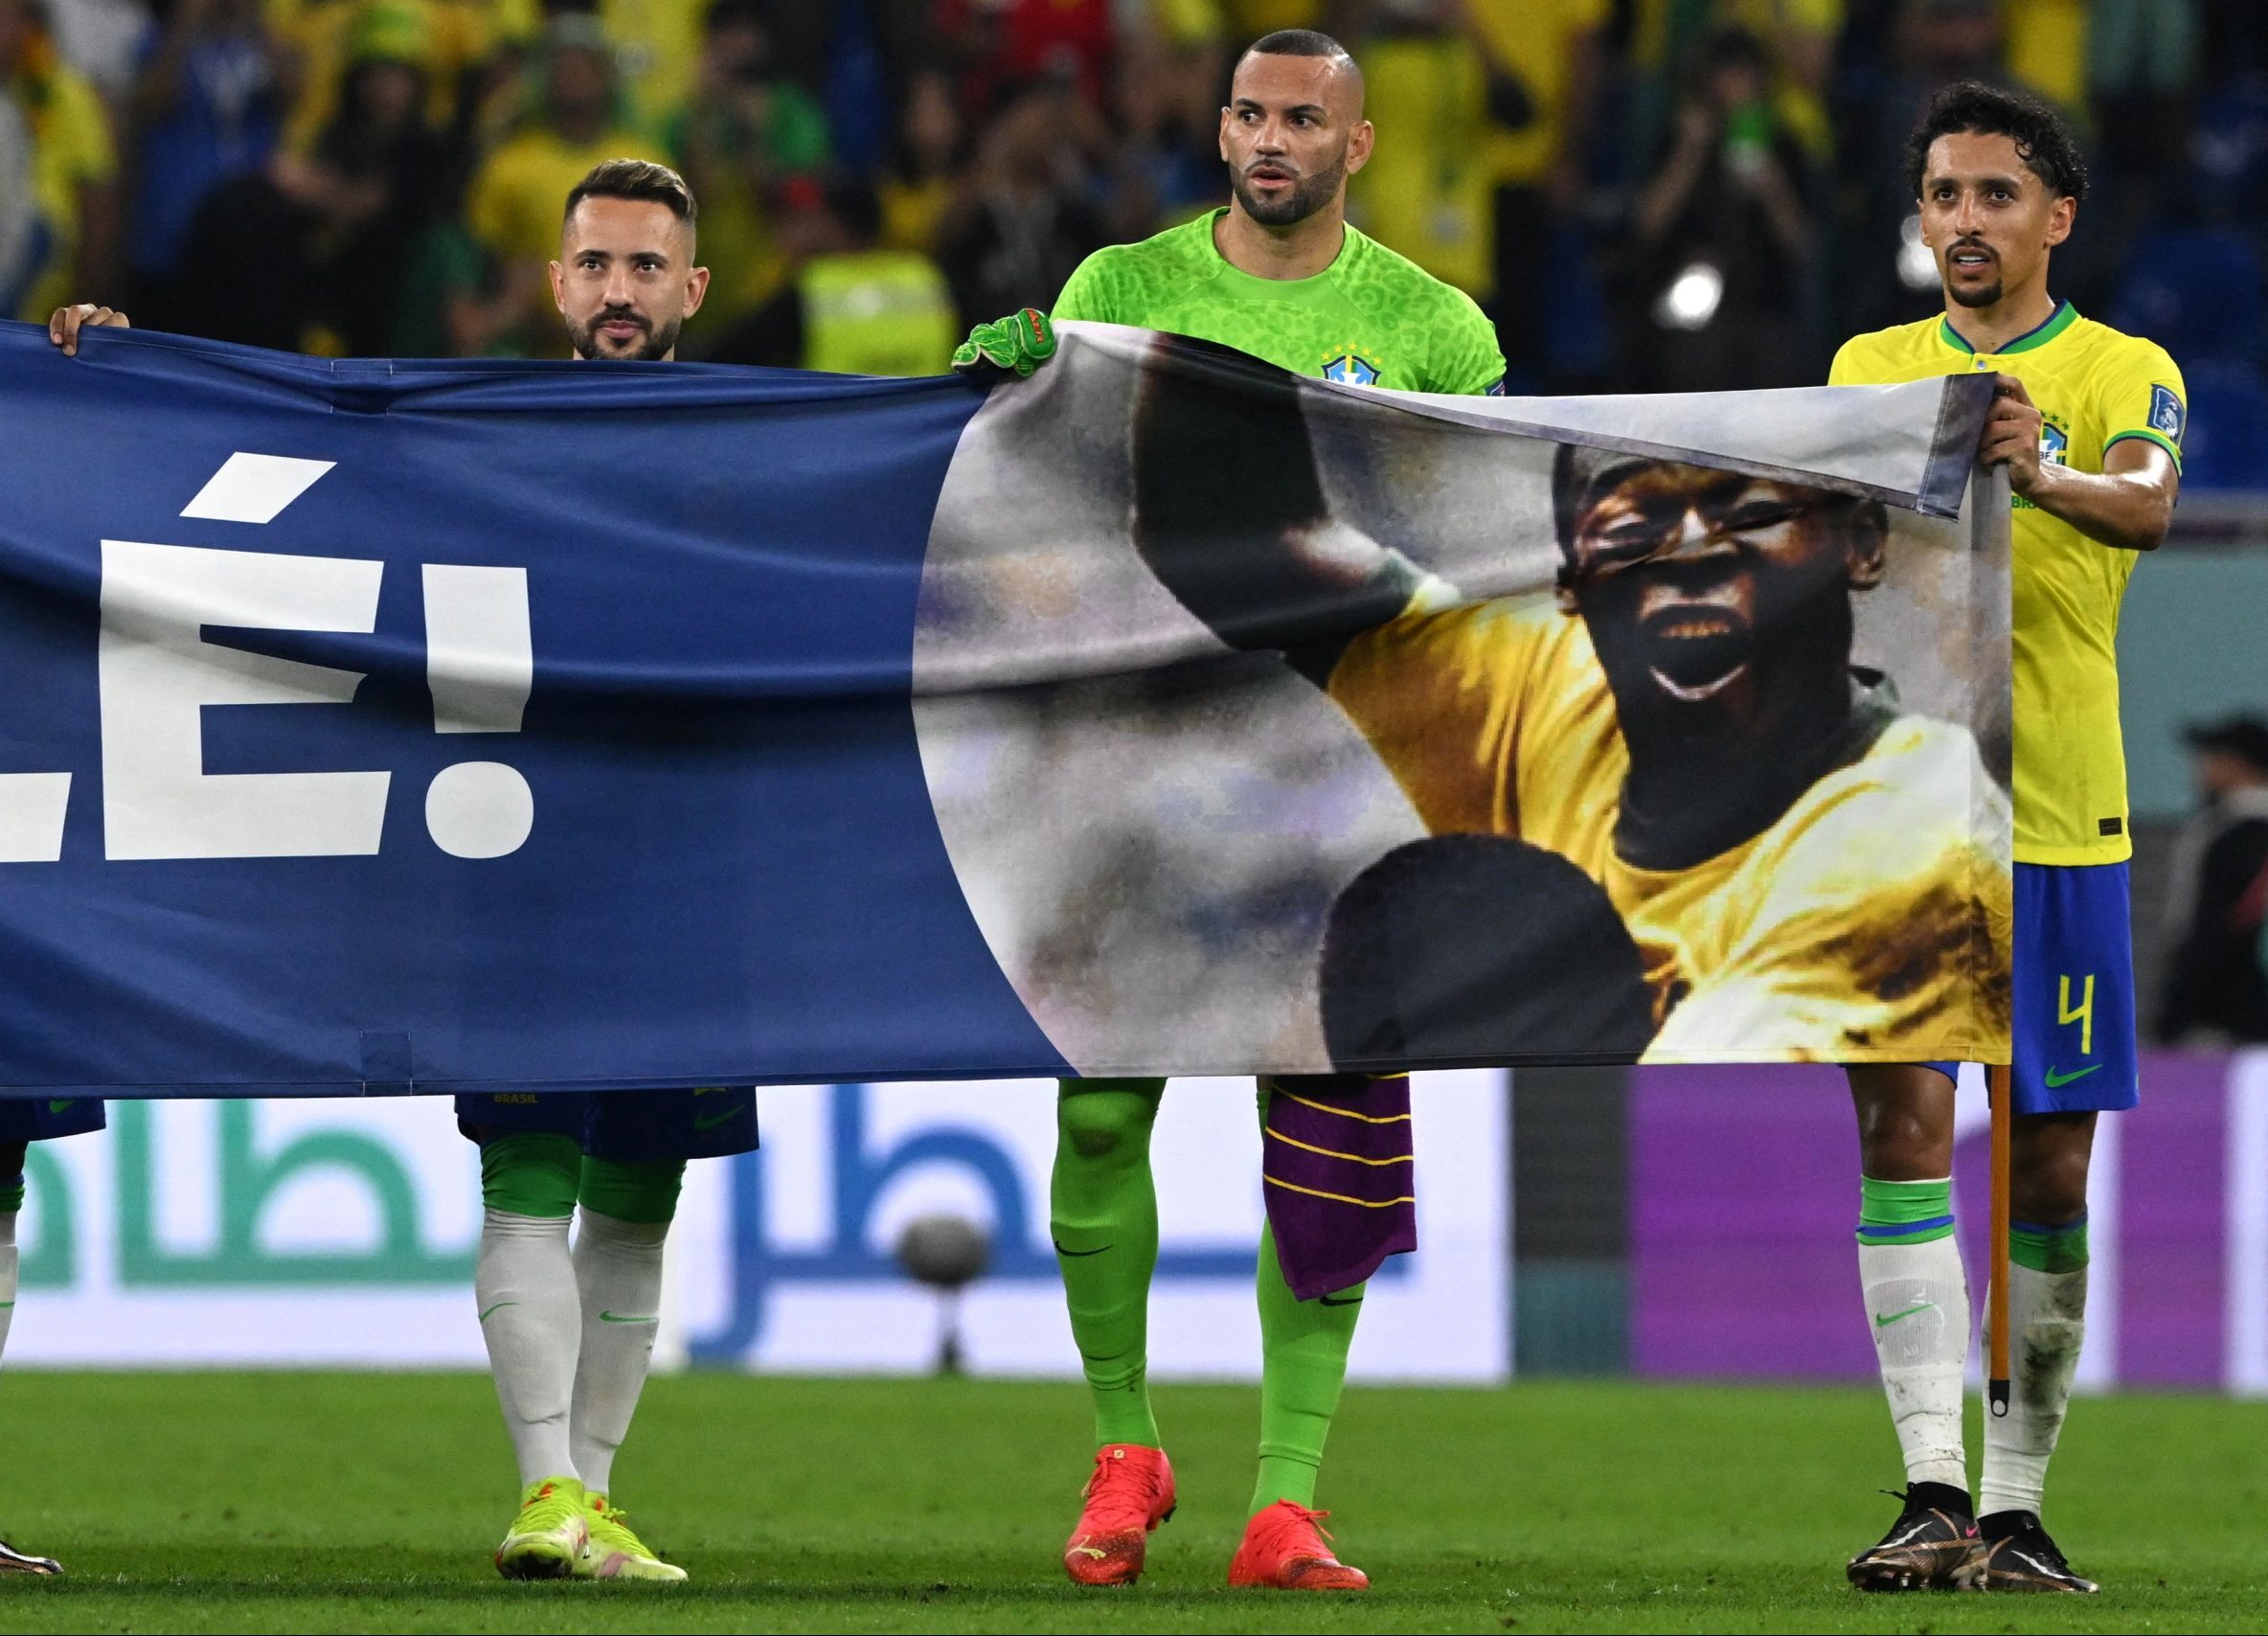 Brazil's forward #21 Rodrygo, Brazil's midfielder #22 Everton Ribeiro, Brazil's goalkeeper #12 Weverton and Brazil's defender #04 Marquinhos hold a banner depicting Brazilian football superstar Pele as he celebrates after qualifying to the next round after defeating South Korea 4-1 in the Qatar 2022 World Cup round of 16 football match between Brazil and South Korea at Stadium 974 in Doha on December 5, 2022. (Photo by Pablo PORCIUNCULA / AFP) (Photo by PABLO PORCIUNCULA/AFP via Getty Images)